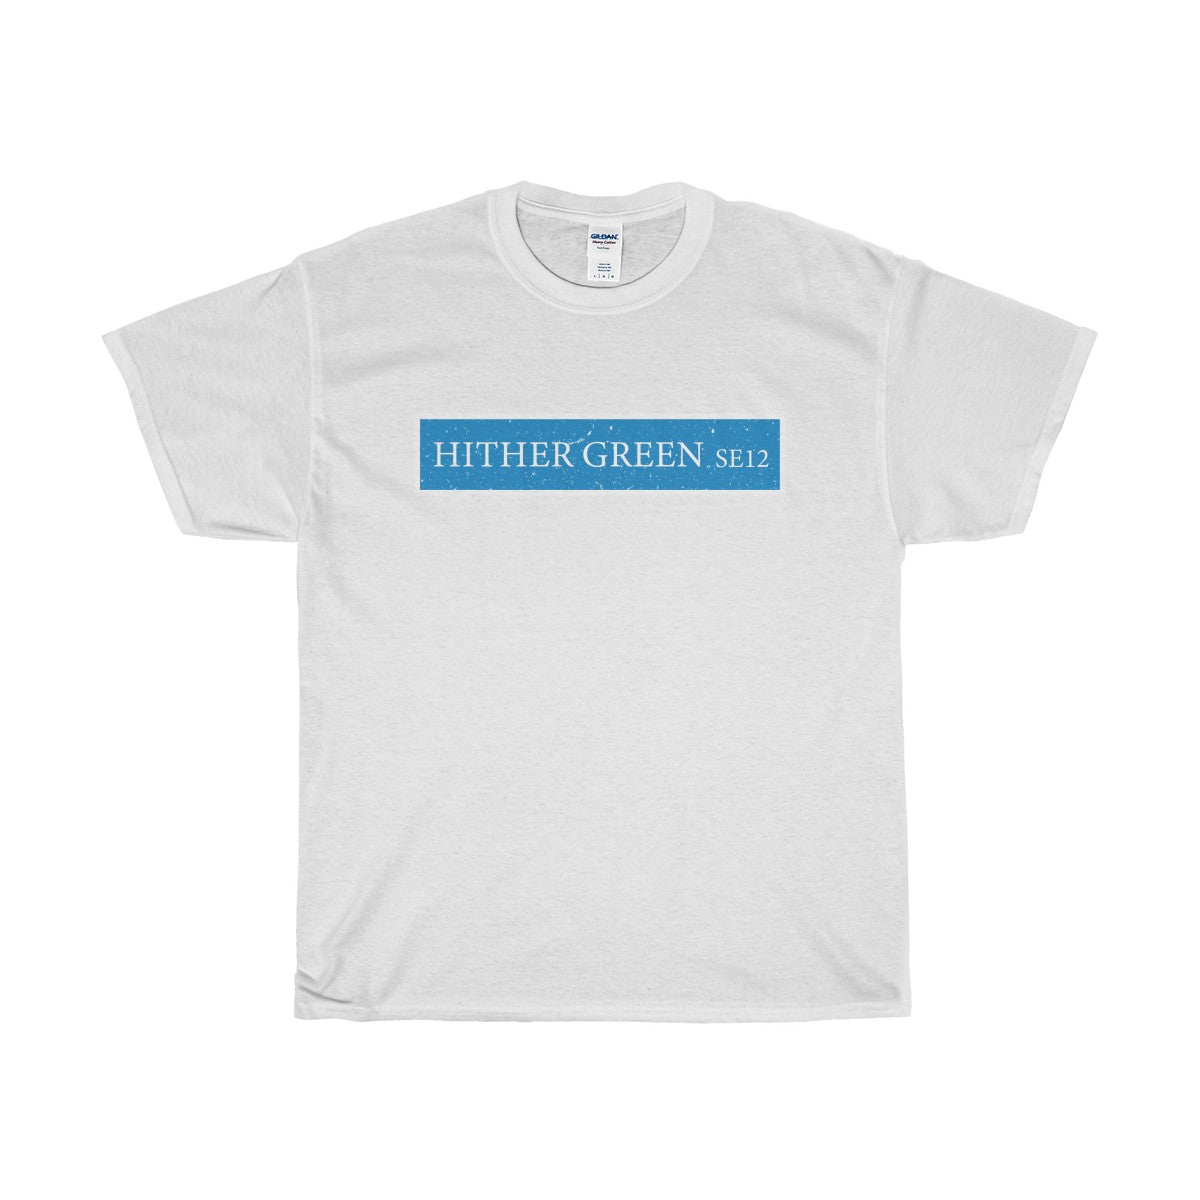 Hither Green Road Sign SE12 T-Shirt